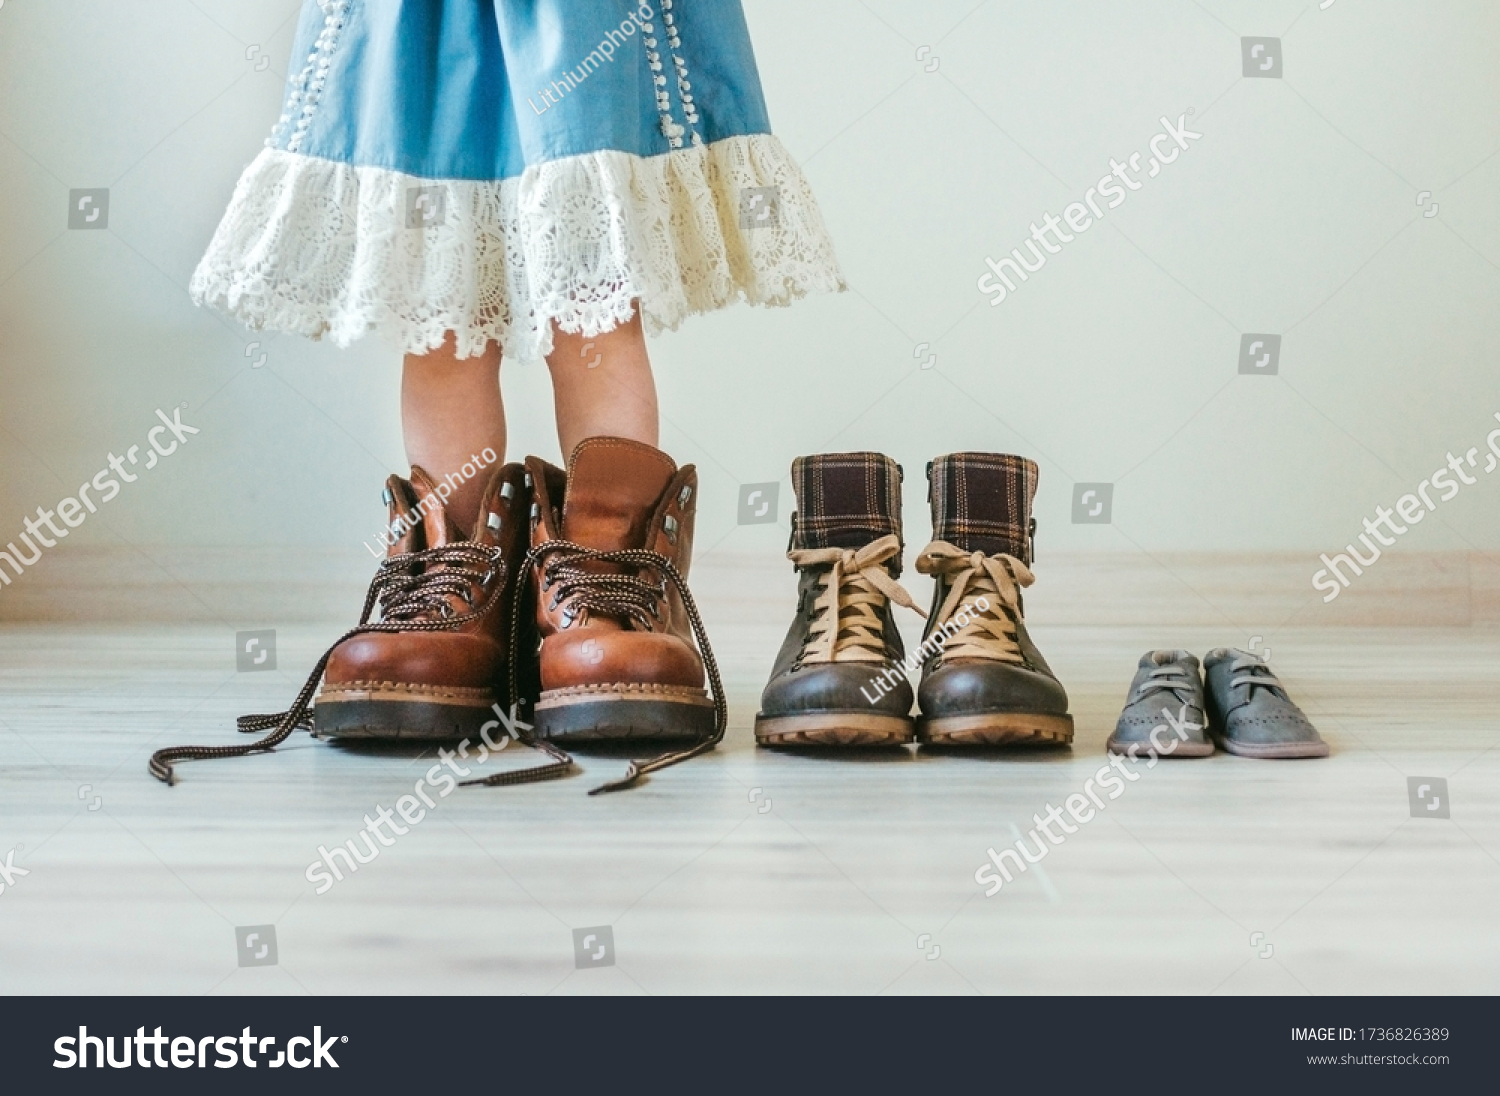 Close up of little girl putting on fathers hiking shoes. Three pairs of shoes for family indoor. #1736826389